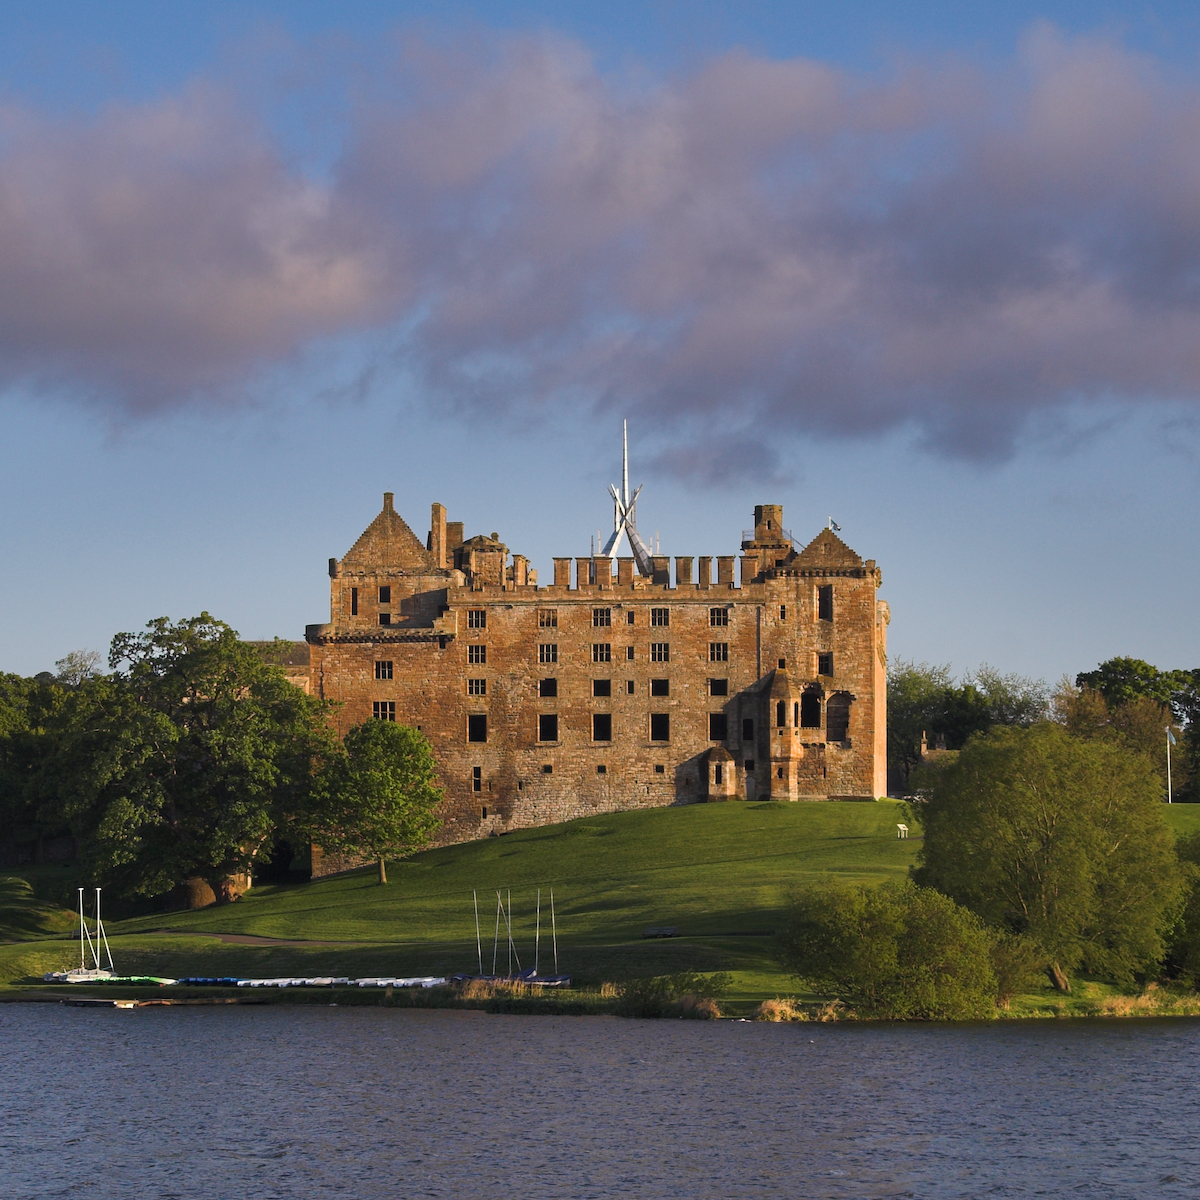 Linlithgow Palace, the birthplace of Mary Queen of Scots